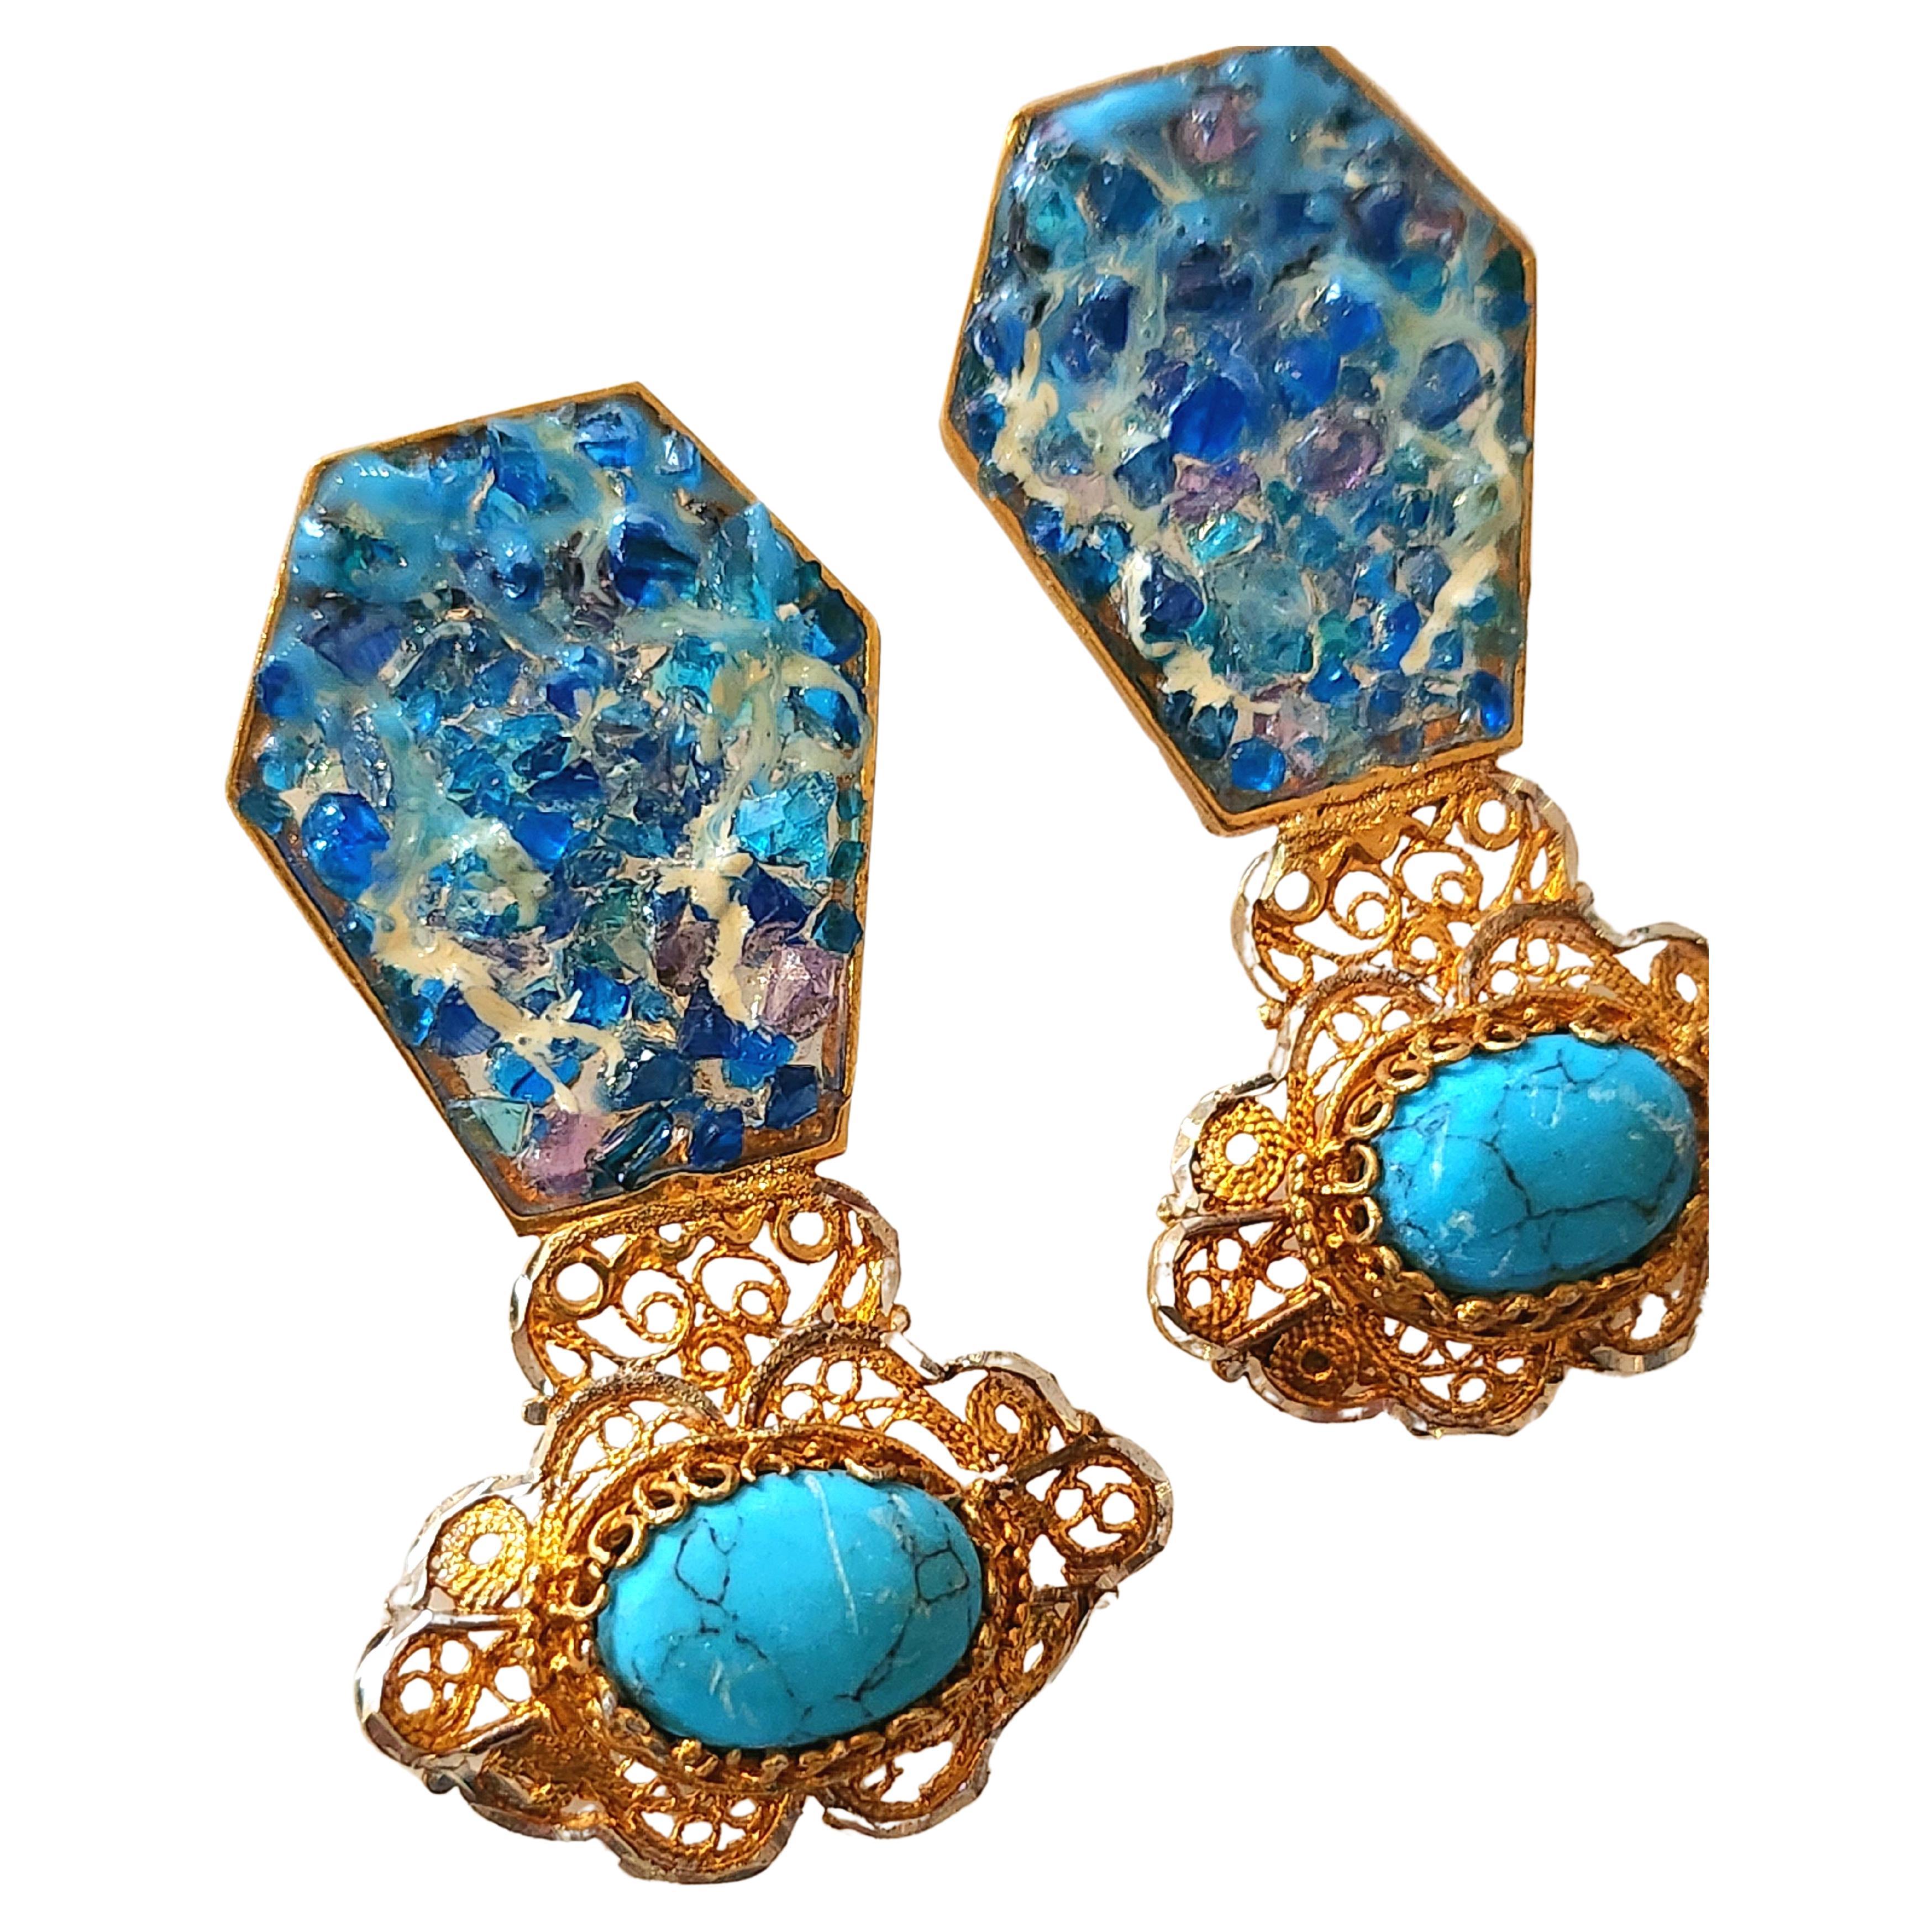 Contemporary Large silver hand made earrings gold plated with 750k gold with colorful blue plaque ajoure enamel technique and terqouse stones in byzantin style earrings lenght 5.5 cm 